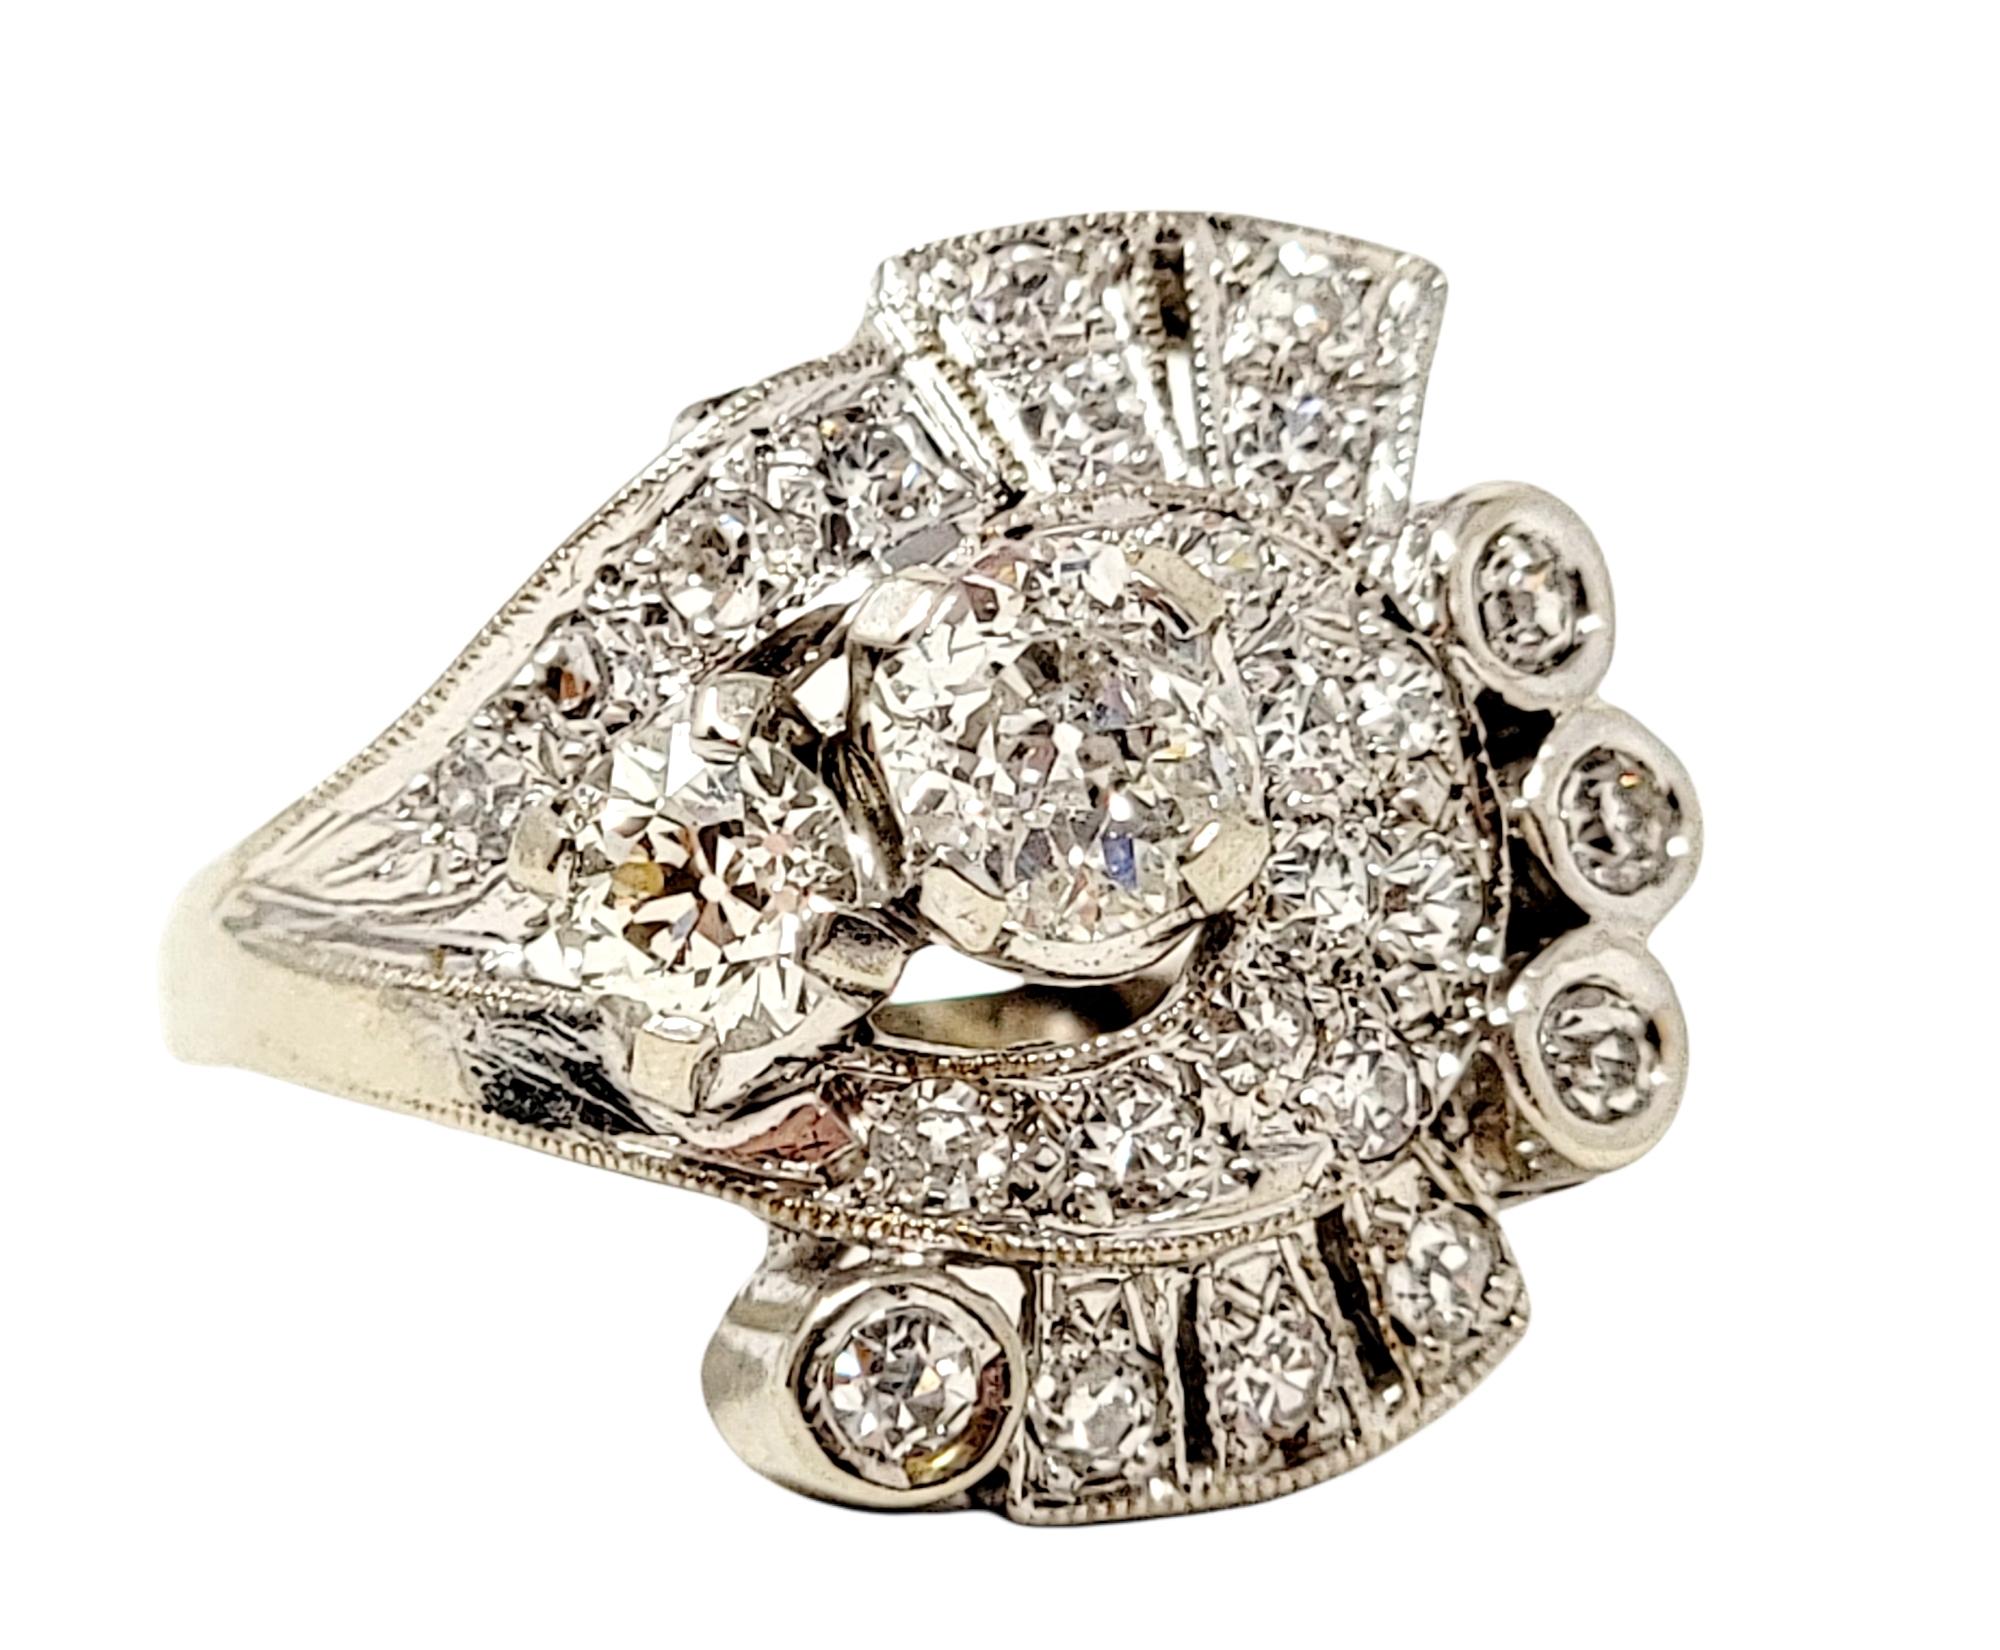 1.05 Carats Total Vintage Old Mine Cut Diamond Cluster Ring 14 Karat White Gold In Good Condition For Sale In Scottsdale, AZ